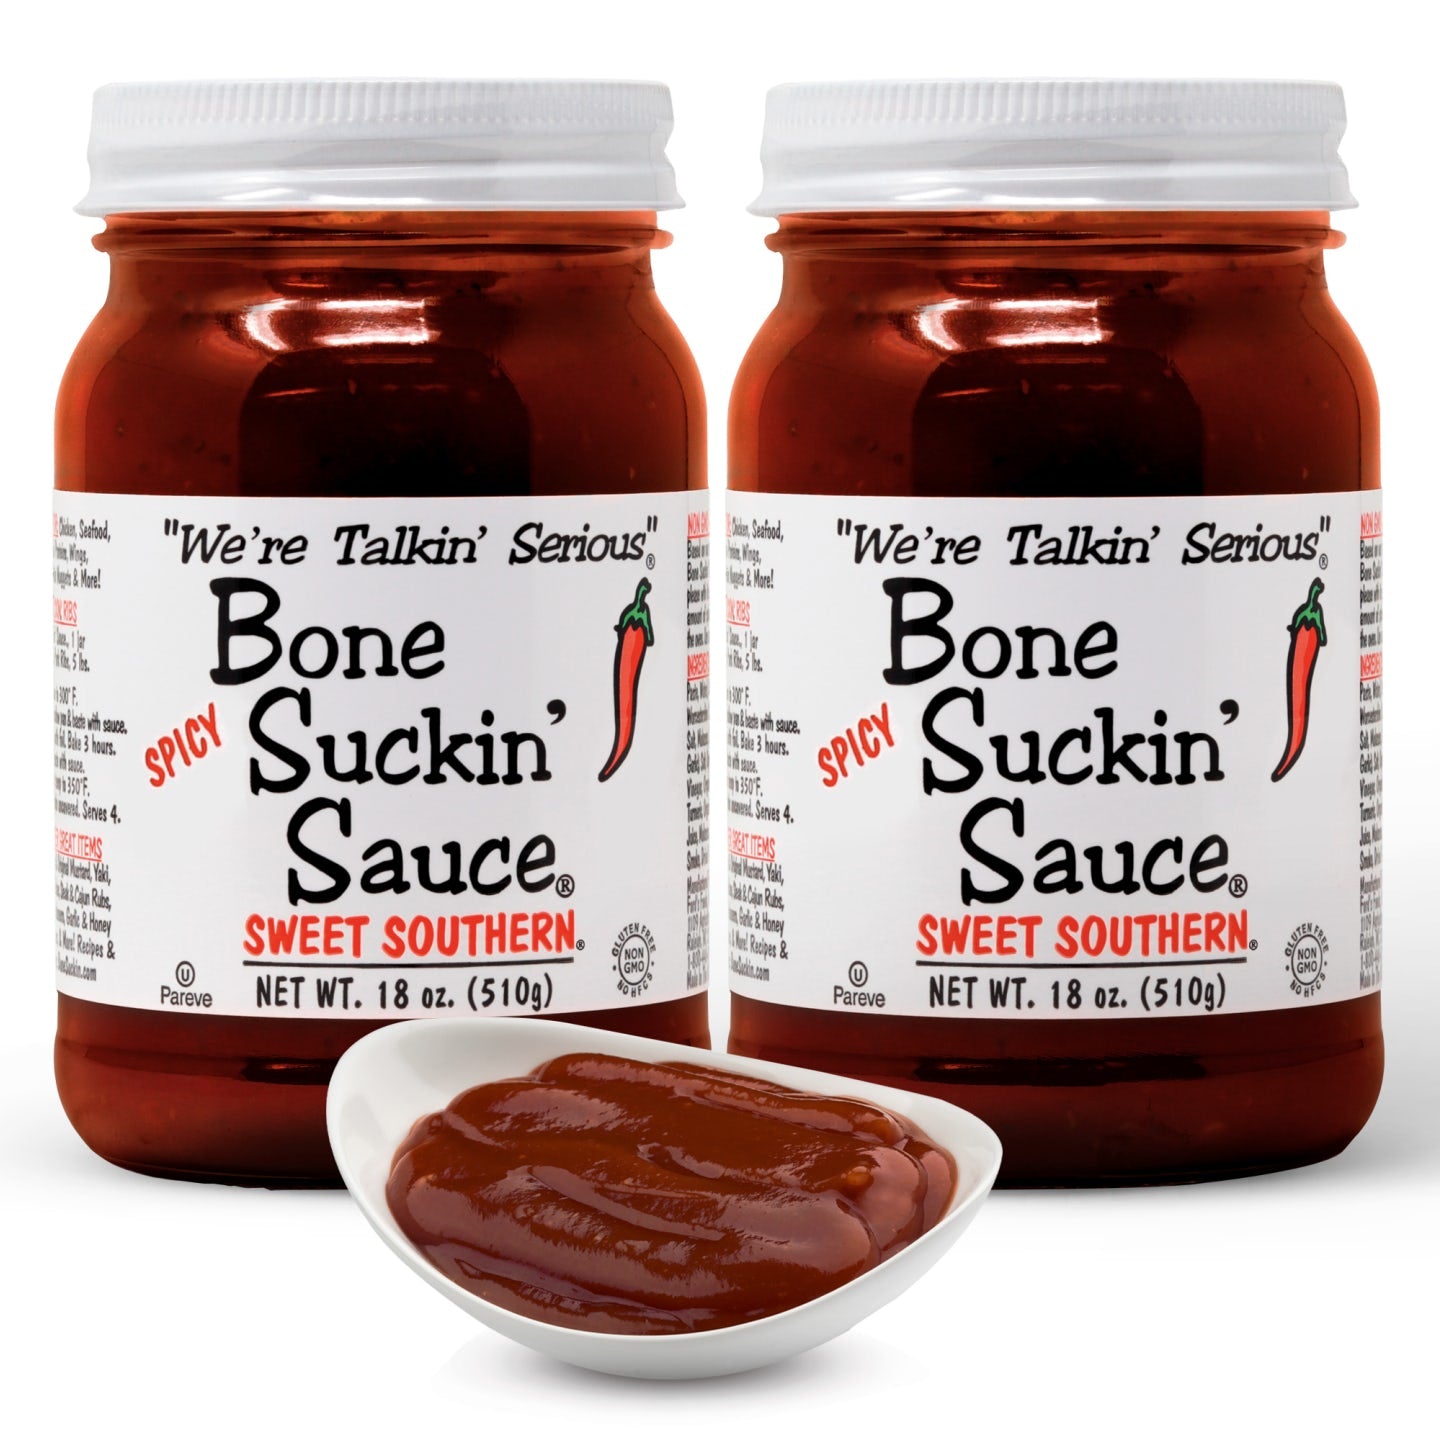 Bone Suckin' Sauce Sweet Southern Spicy BBQ Sauce - 18 oz in Glass Bottle, For Ribs, Chicken, Pork, Beef - Gluten-Free, Non-GMO, Kosher, Spicy Barbecue Sauce Sweetened with Cane Sugar & Molasses. 2 pack